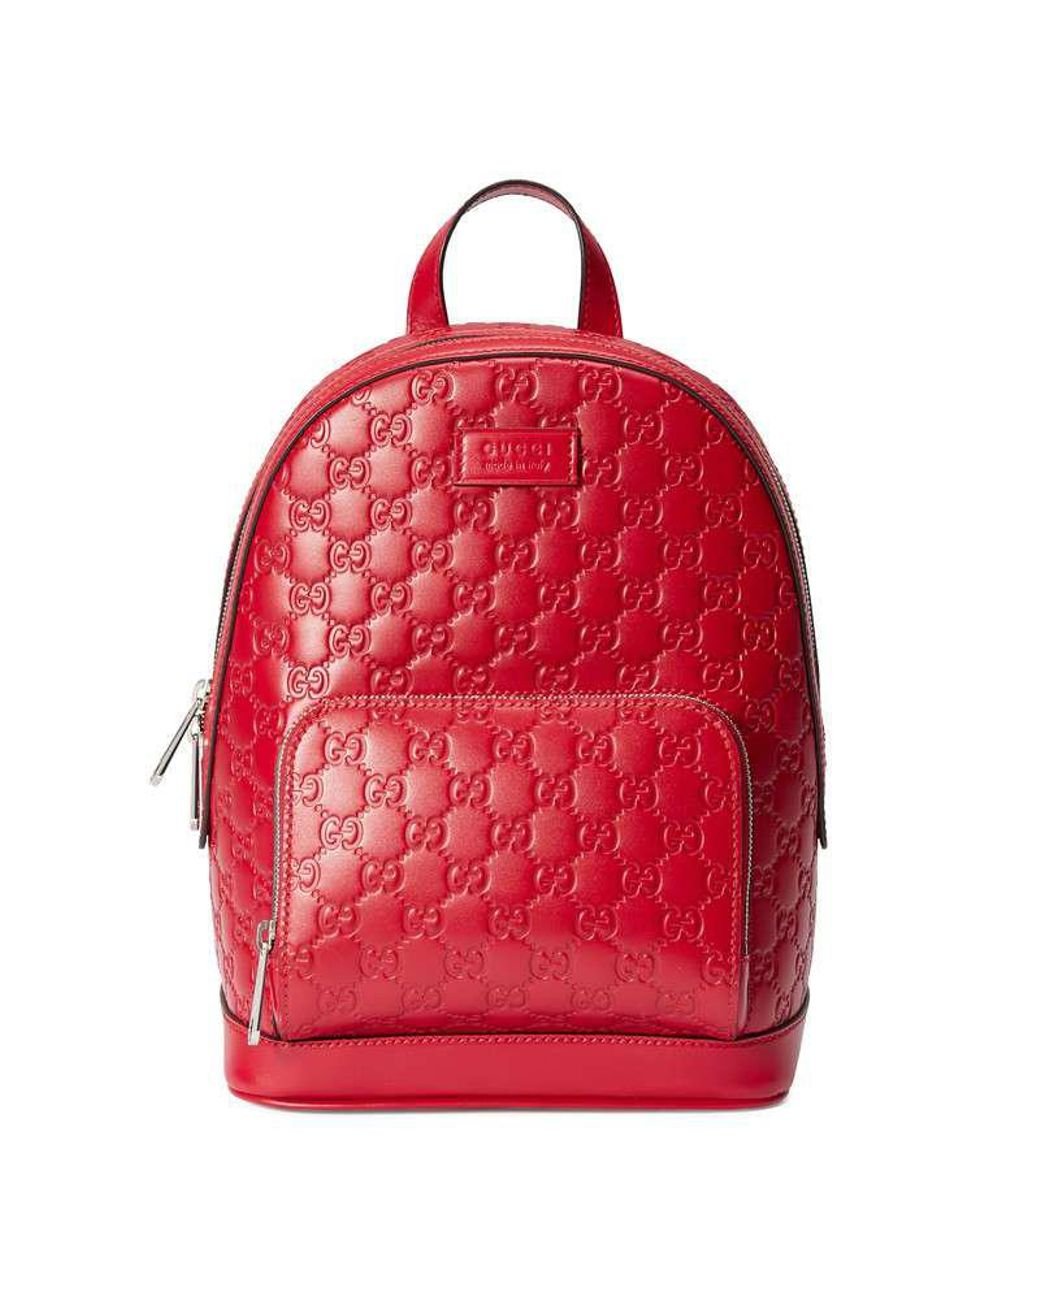 Top 71+ imagen red gucci backpack